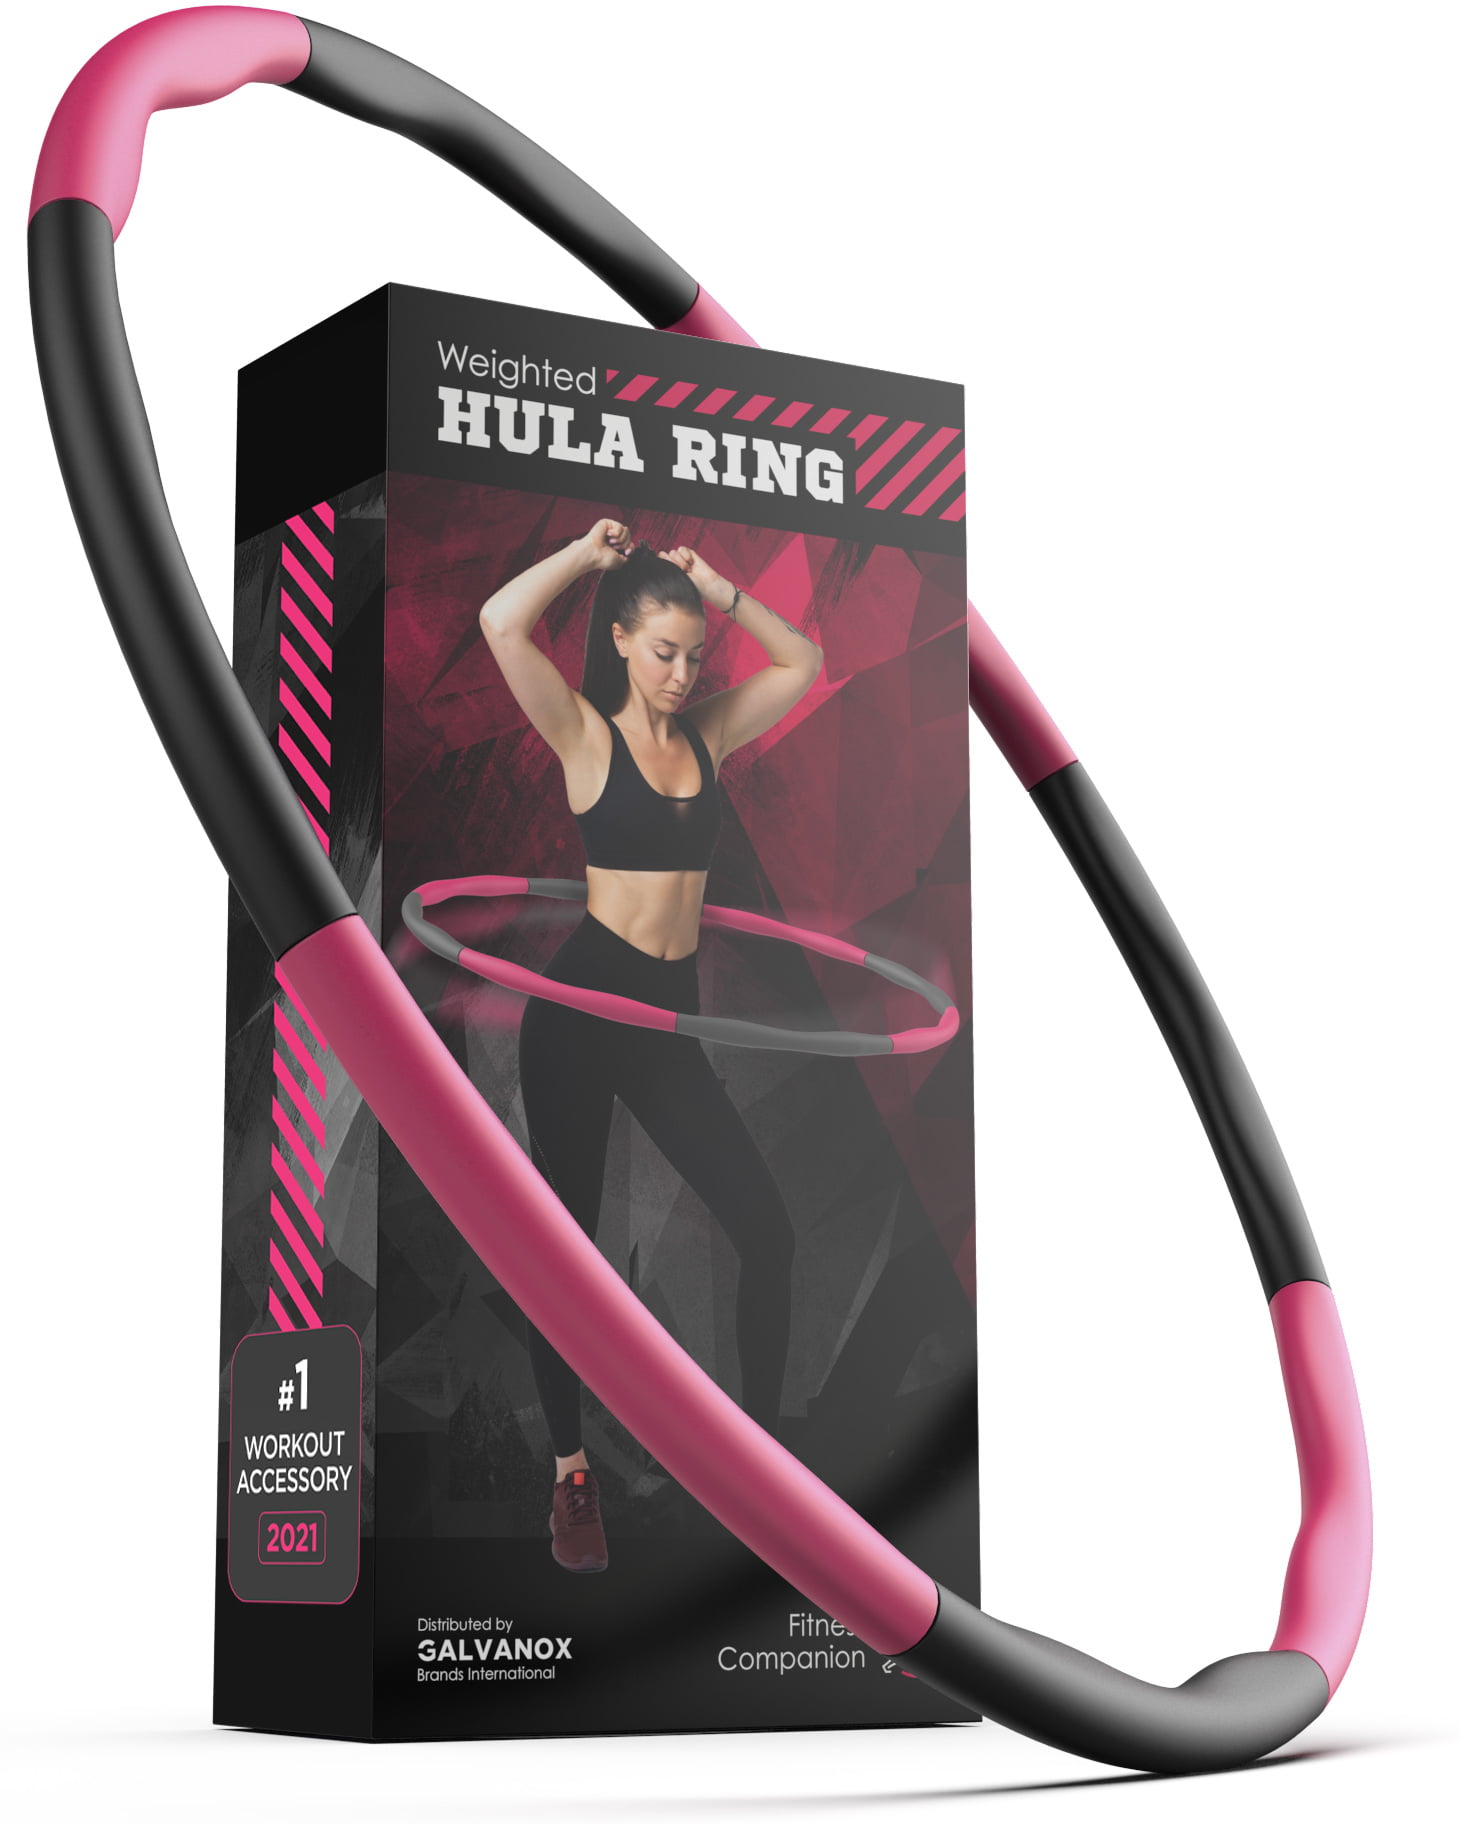 Fenicedoro Hula Hoops for Adults Weight Loss,Smart Weighted Hoola Hoop with Counter,Infinity Hoop Exercise Kit with Resistance Band Jump Rope Body Tape Measure,4 in 1 Hoop Fitness Equipment with 24 Detachable Knots 